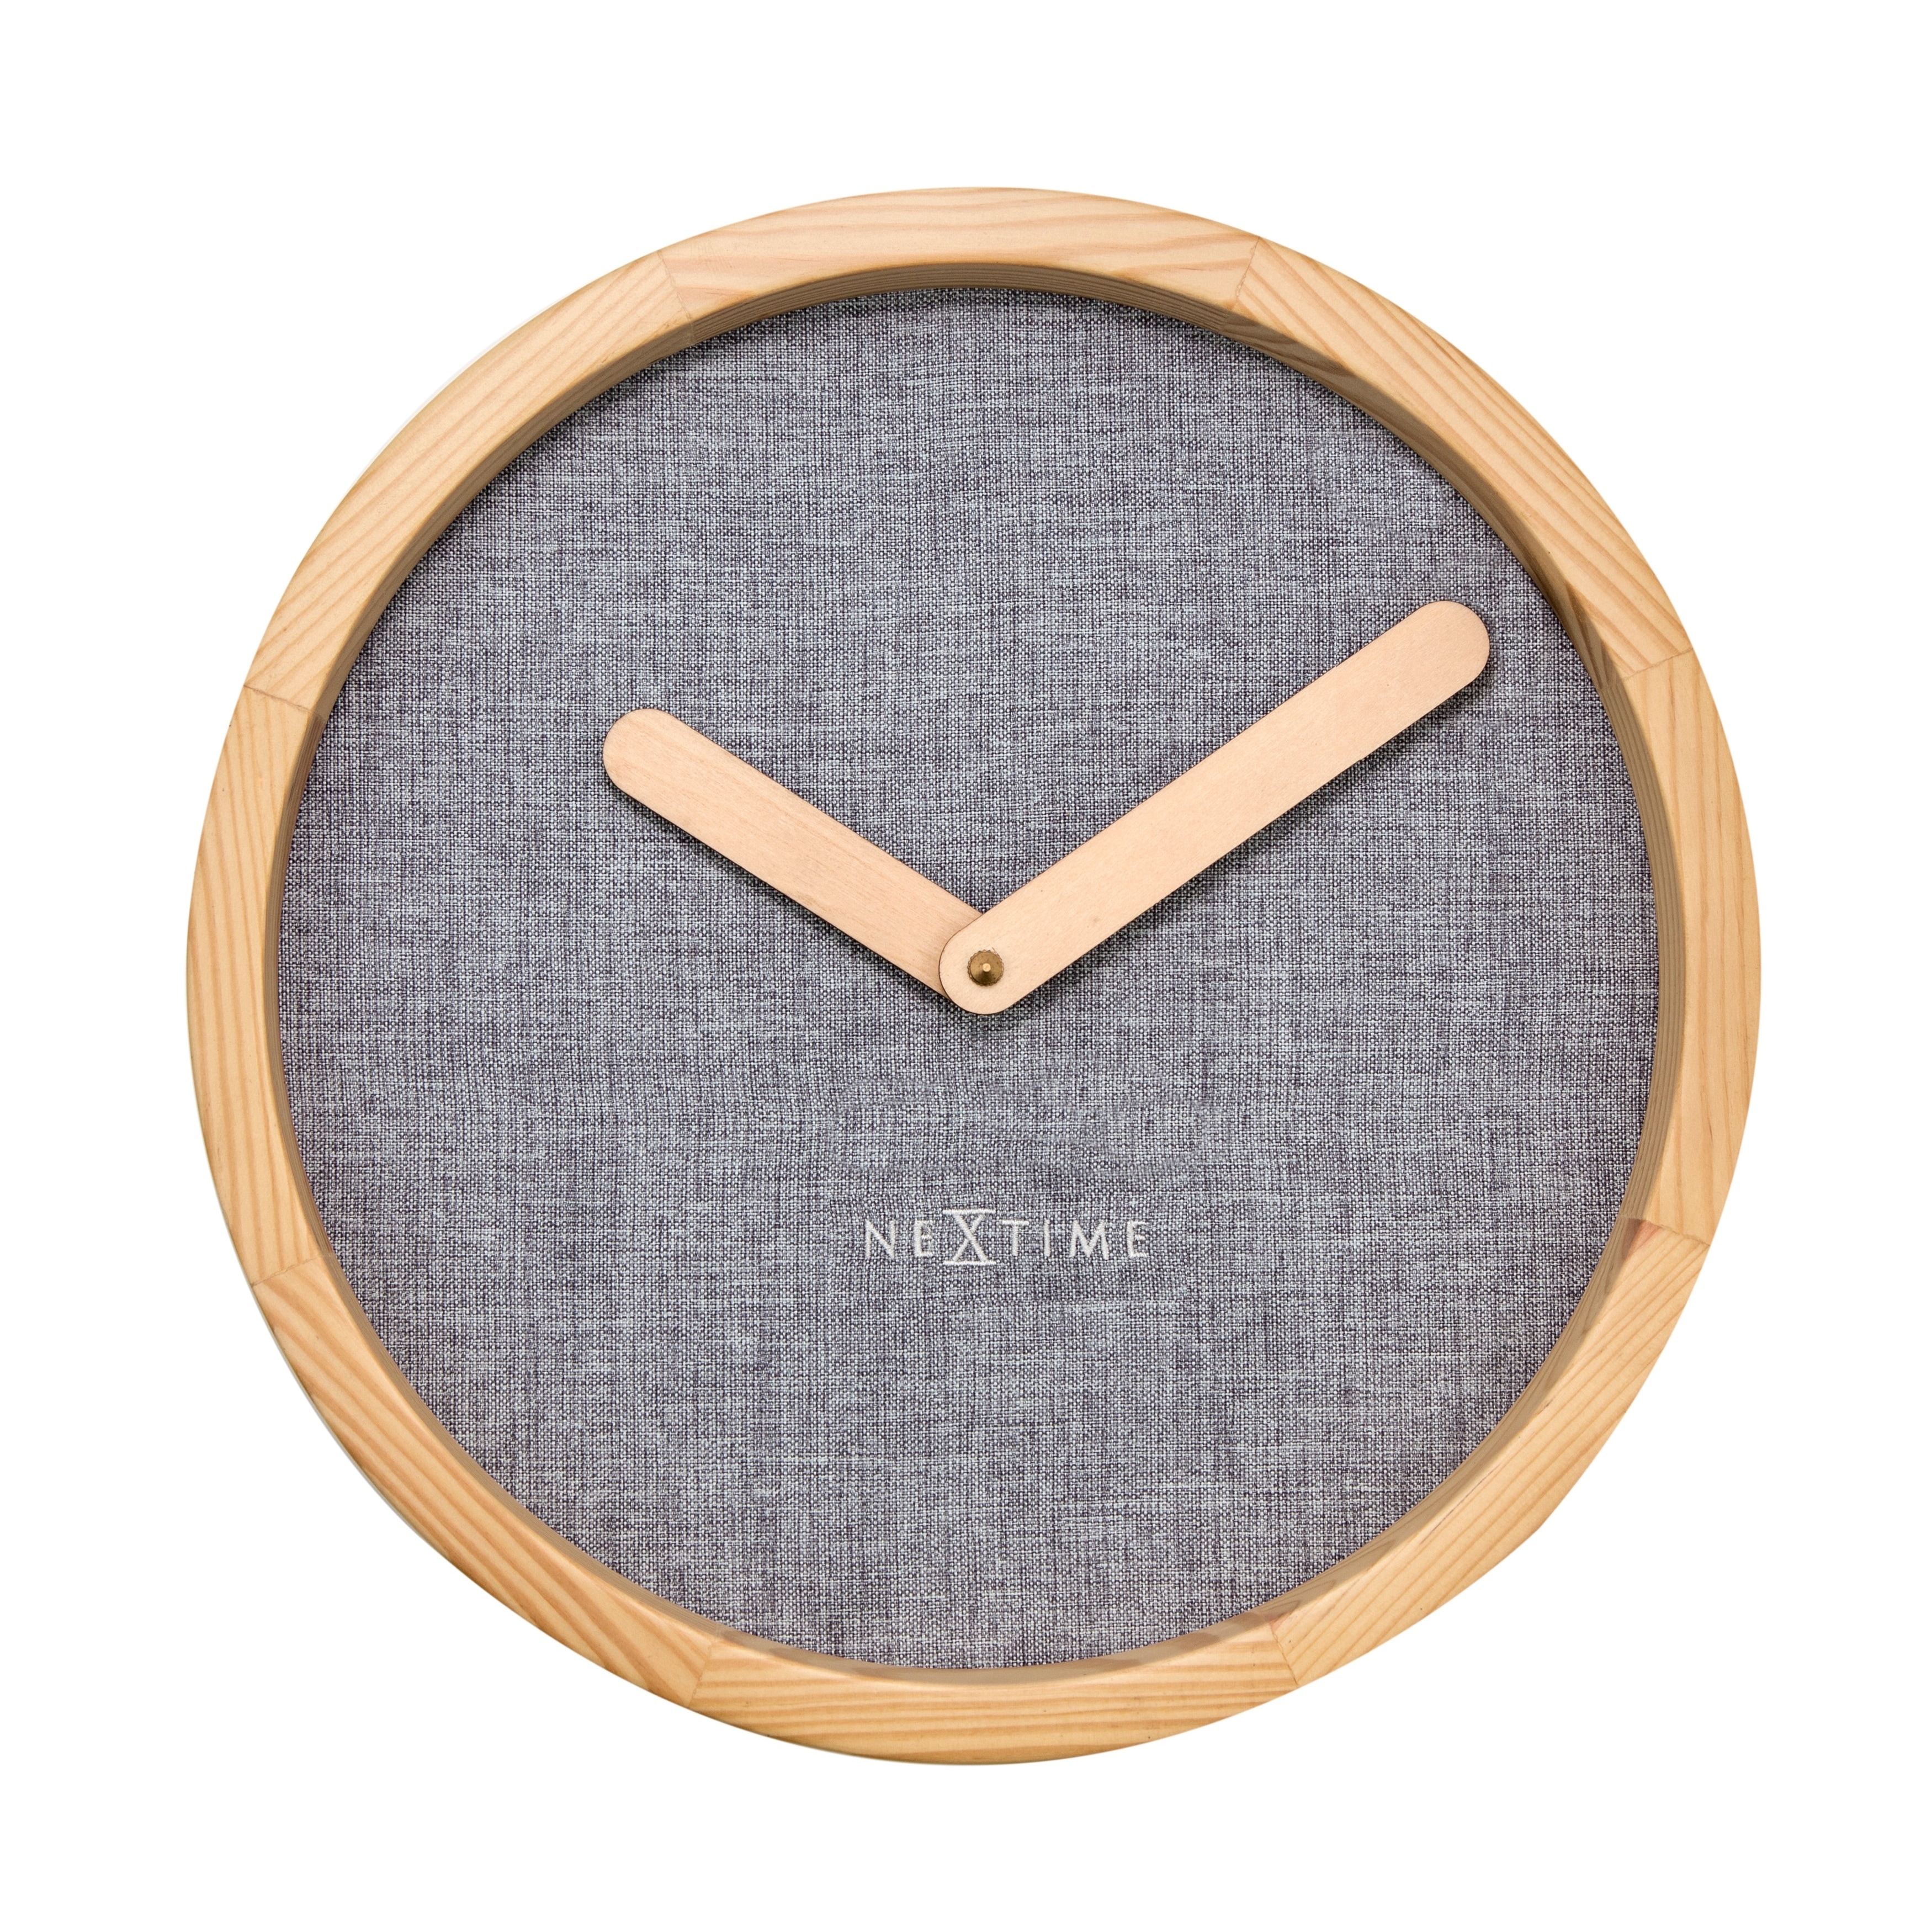 Unek Goods NeXtime Calm Wall Clock, Round, Natural Wood Frame and Hands, Soft Grey Fabric Face, Battery - Overstock - 30766811